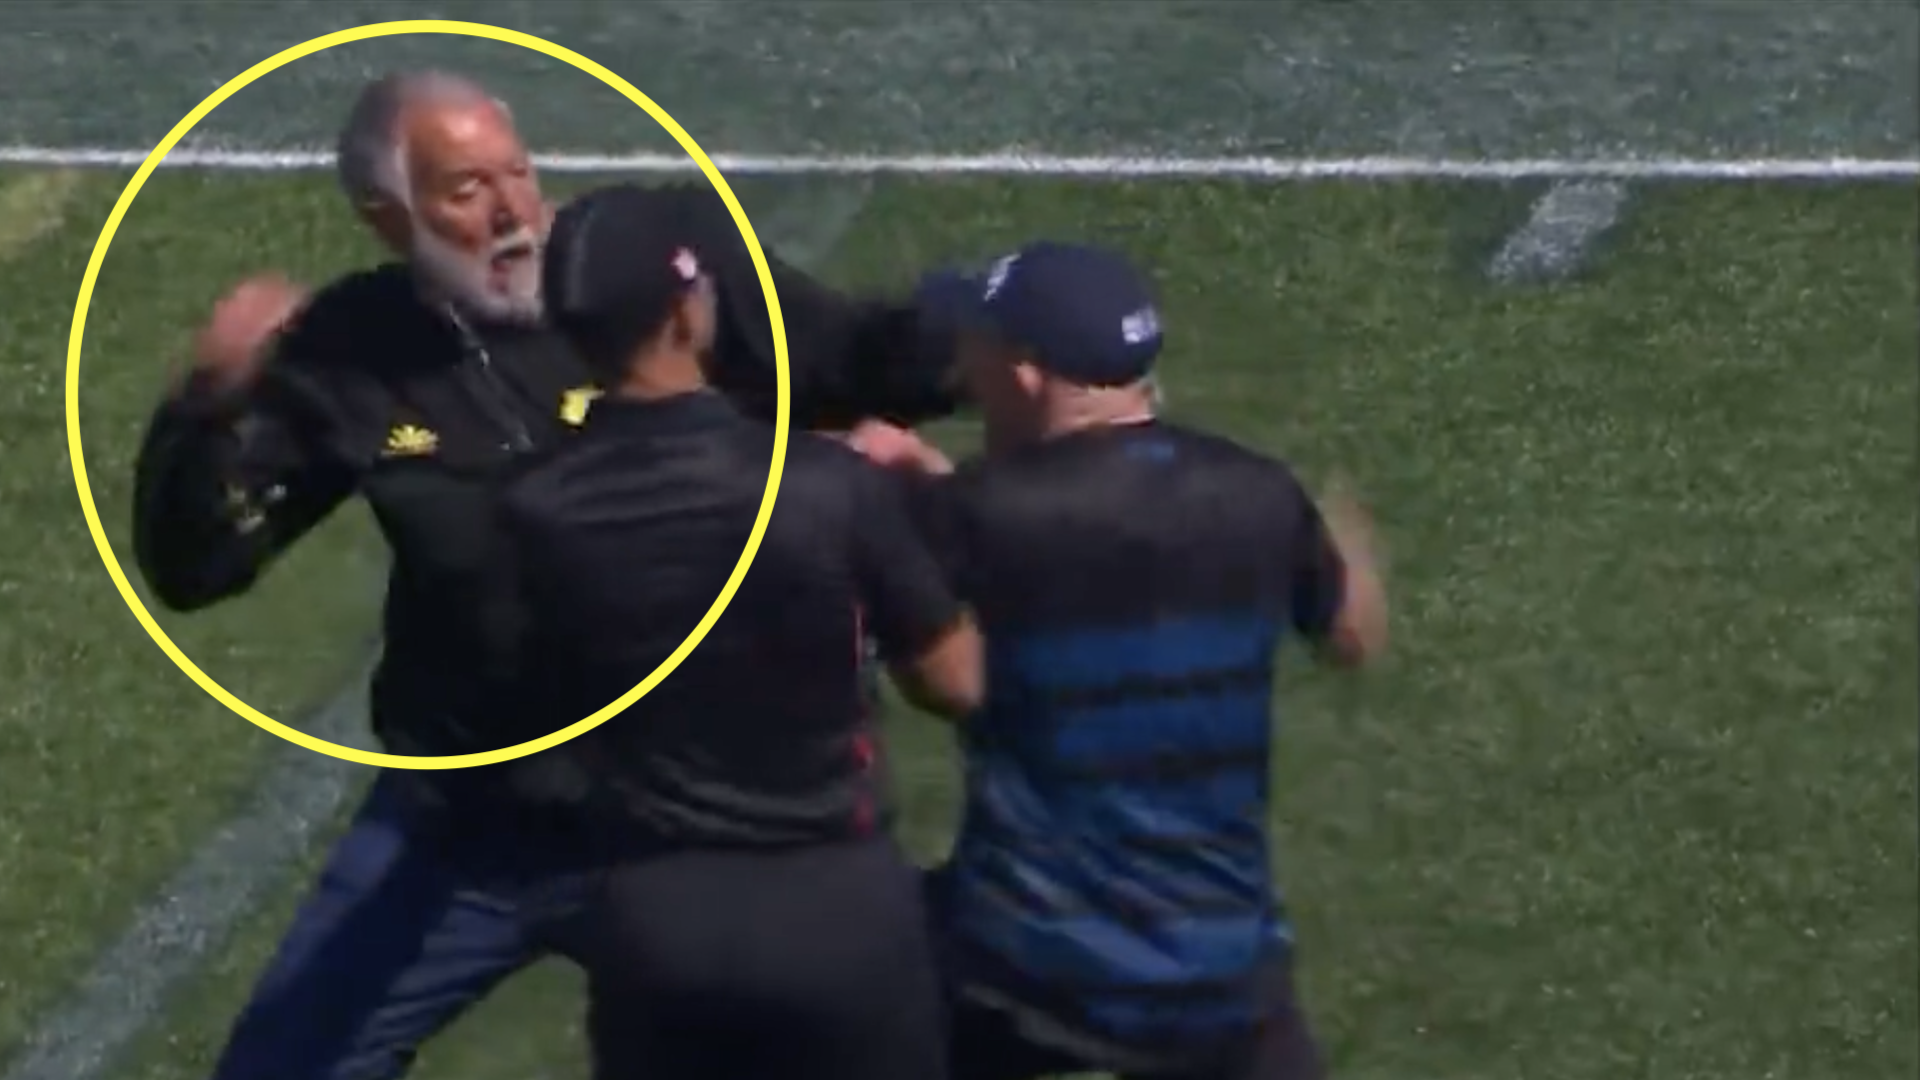 Chaos ensues as players rush in to break up fist fight between coaches in MLR